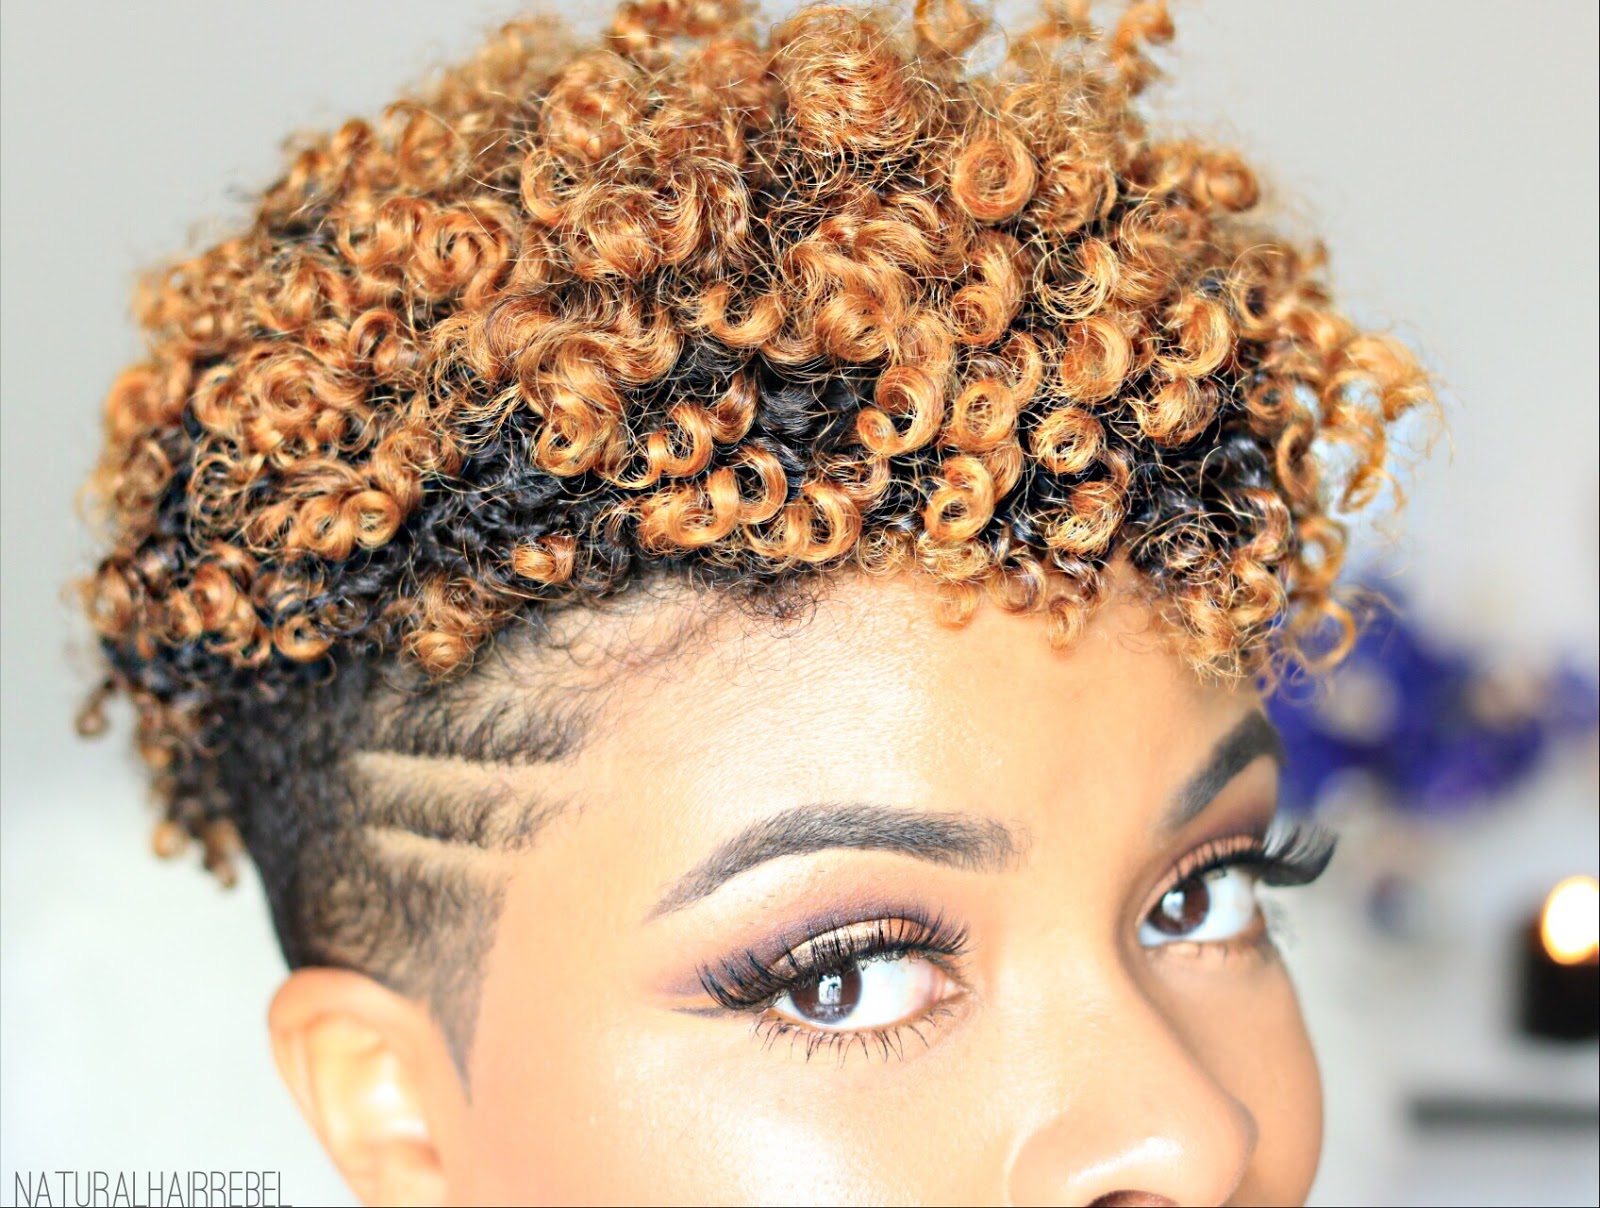 Natural Hair Rebel | Flat Twist Out on Tapered Cut